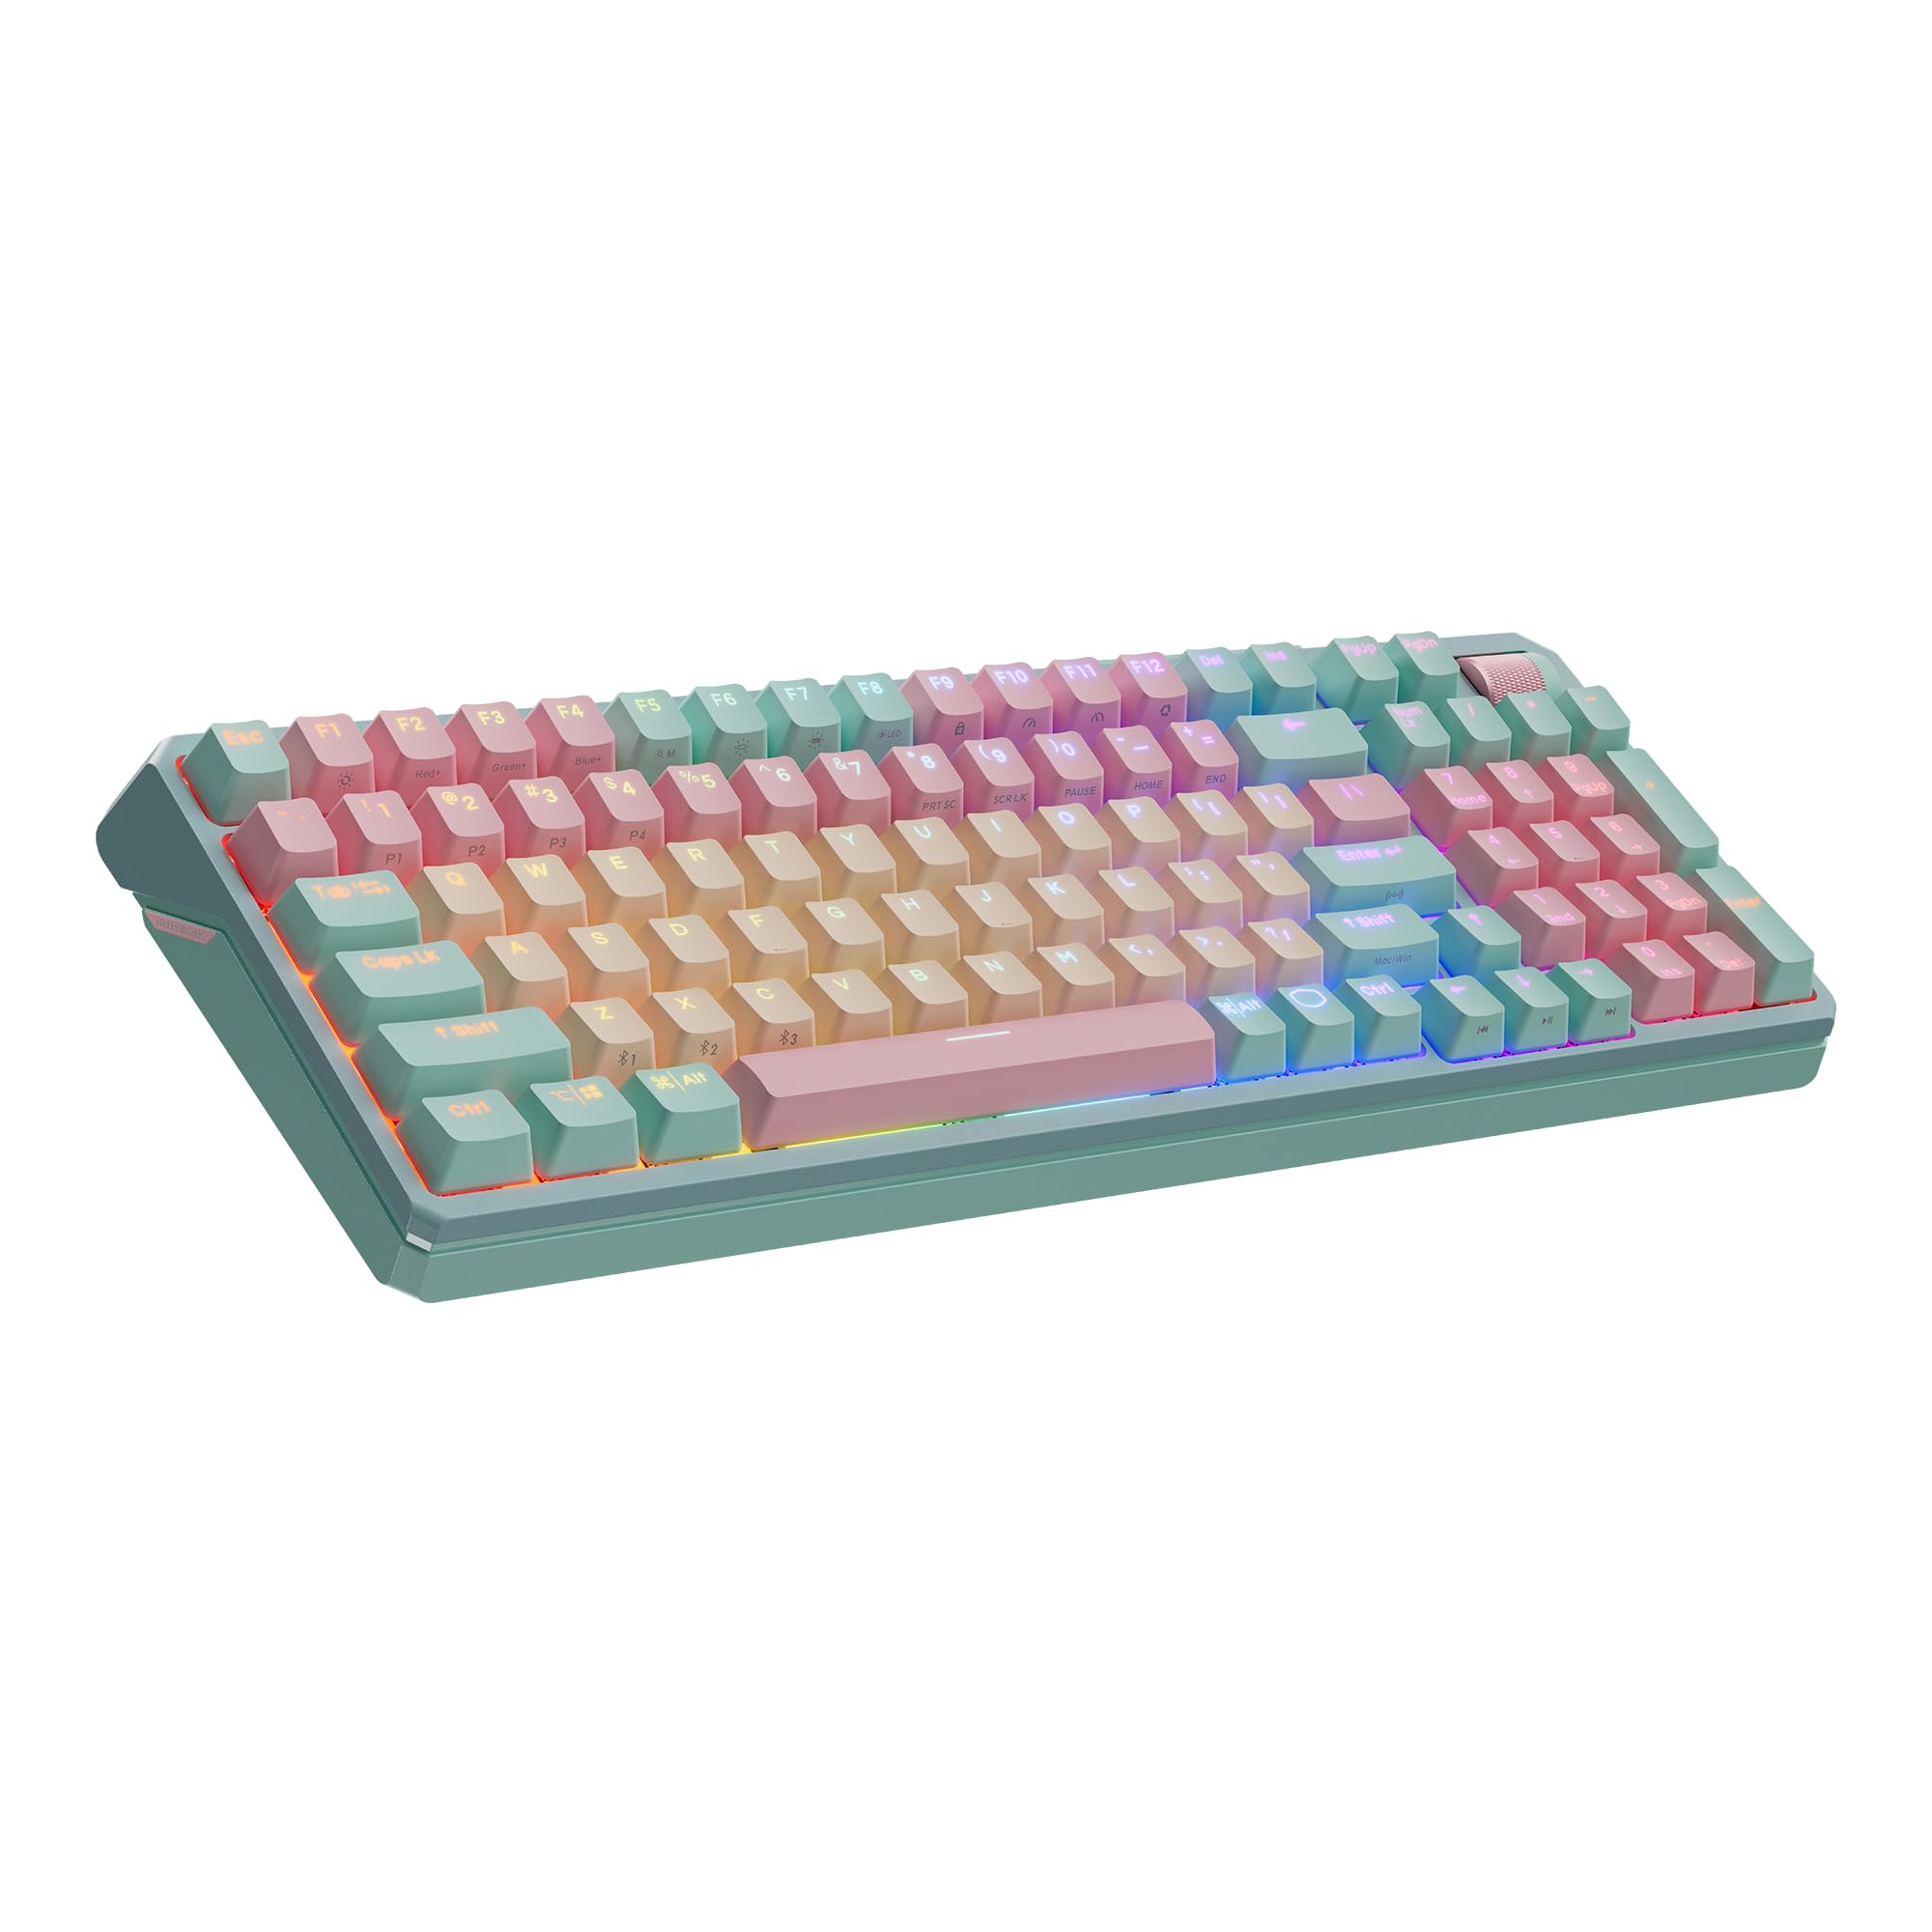 Cooler Master MK770 Macaron Wireless Mechanical RGB Gaming Keyboard, Kailh Box V2 Linear Red Switches, Gasket Structure, Hot-Swappable, Bluetooth|2.4GHz, Tactile 3-Way Dial, QWERTY (MK-770-MCKR1-US)